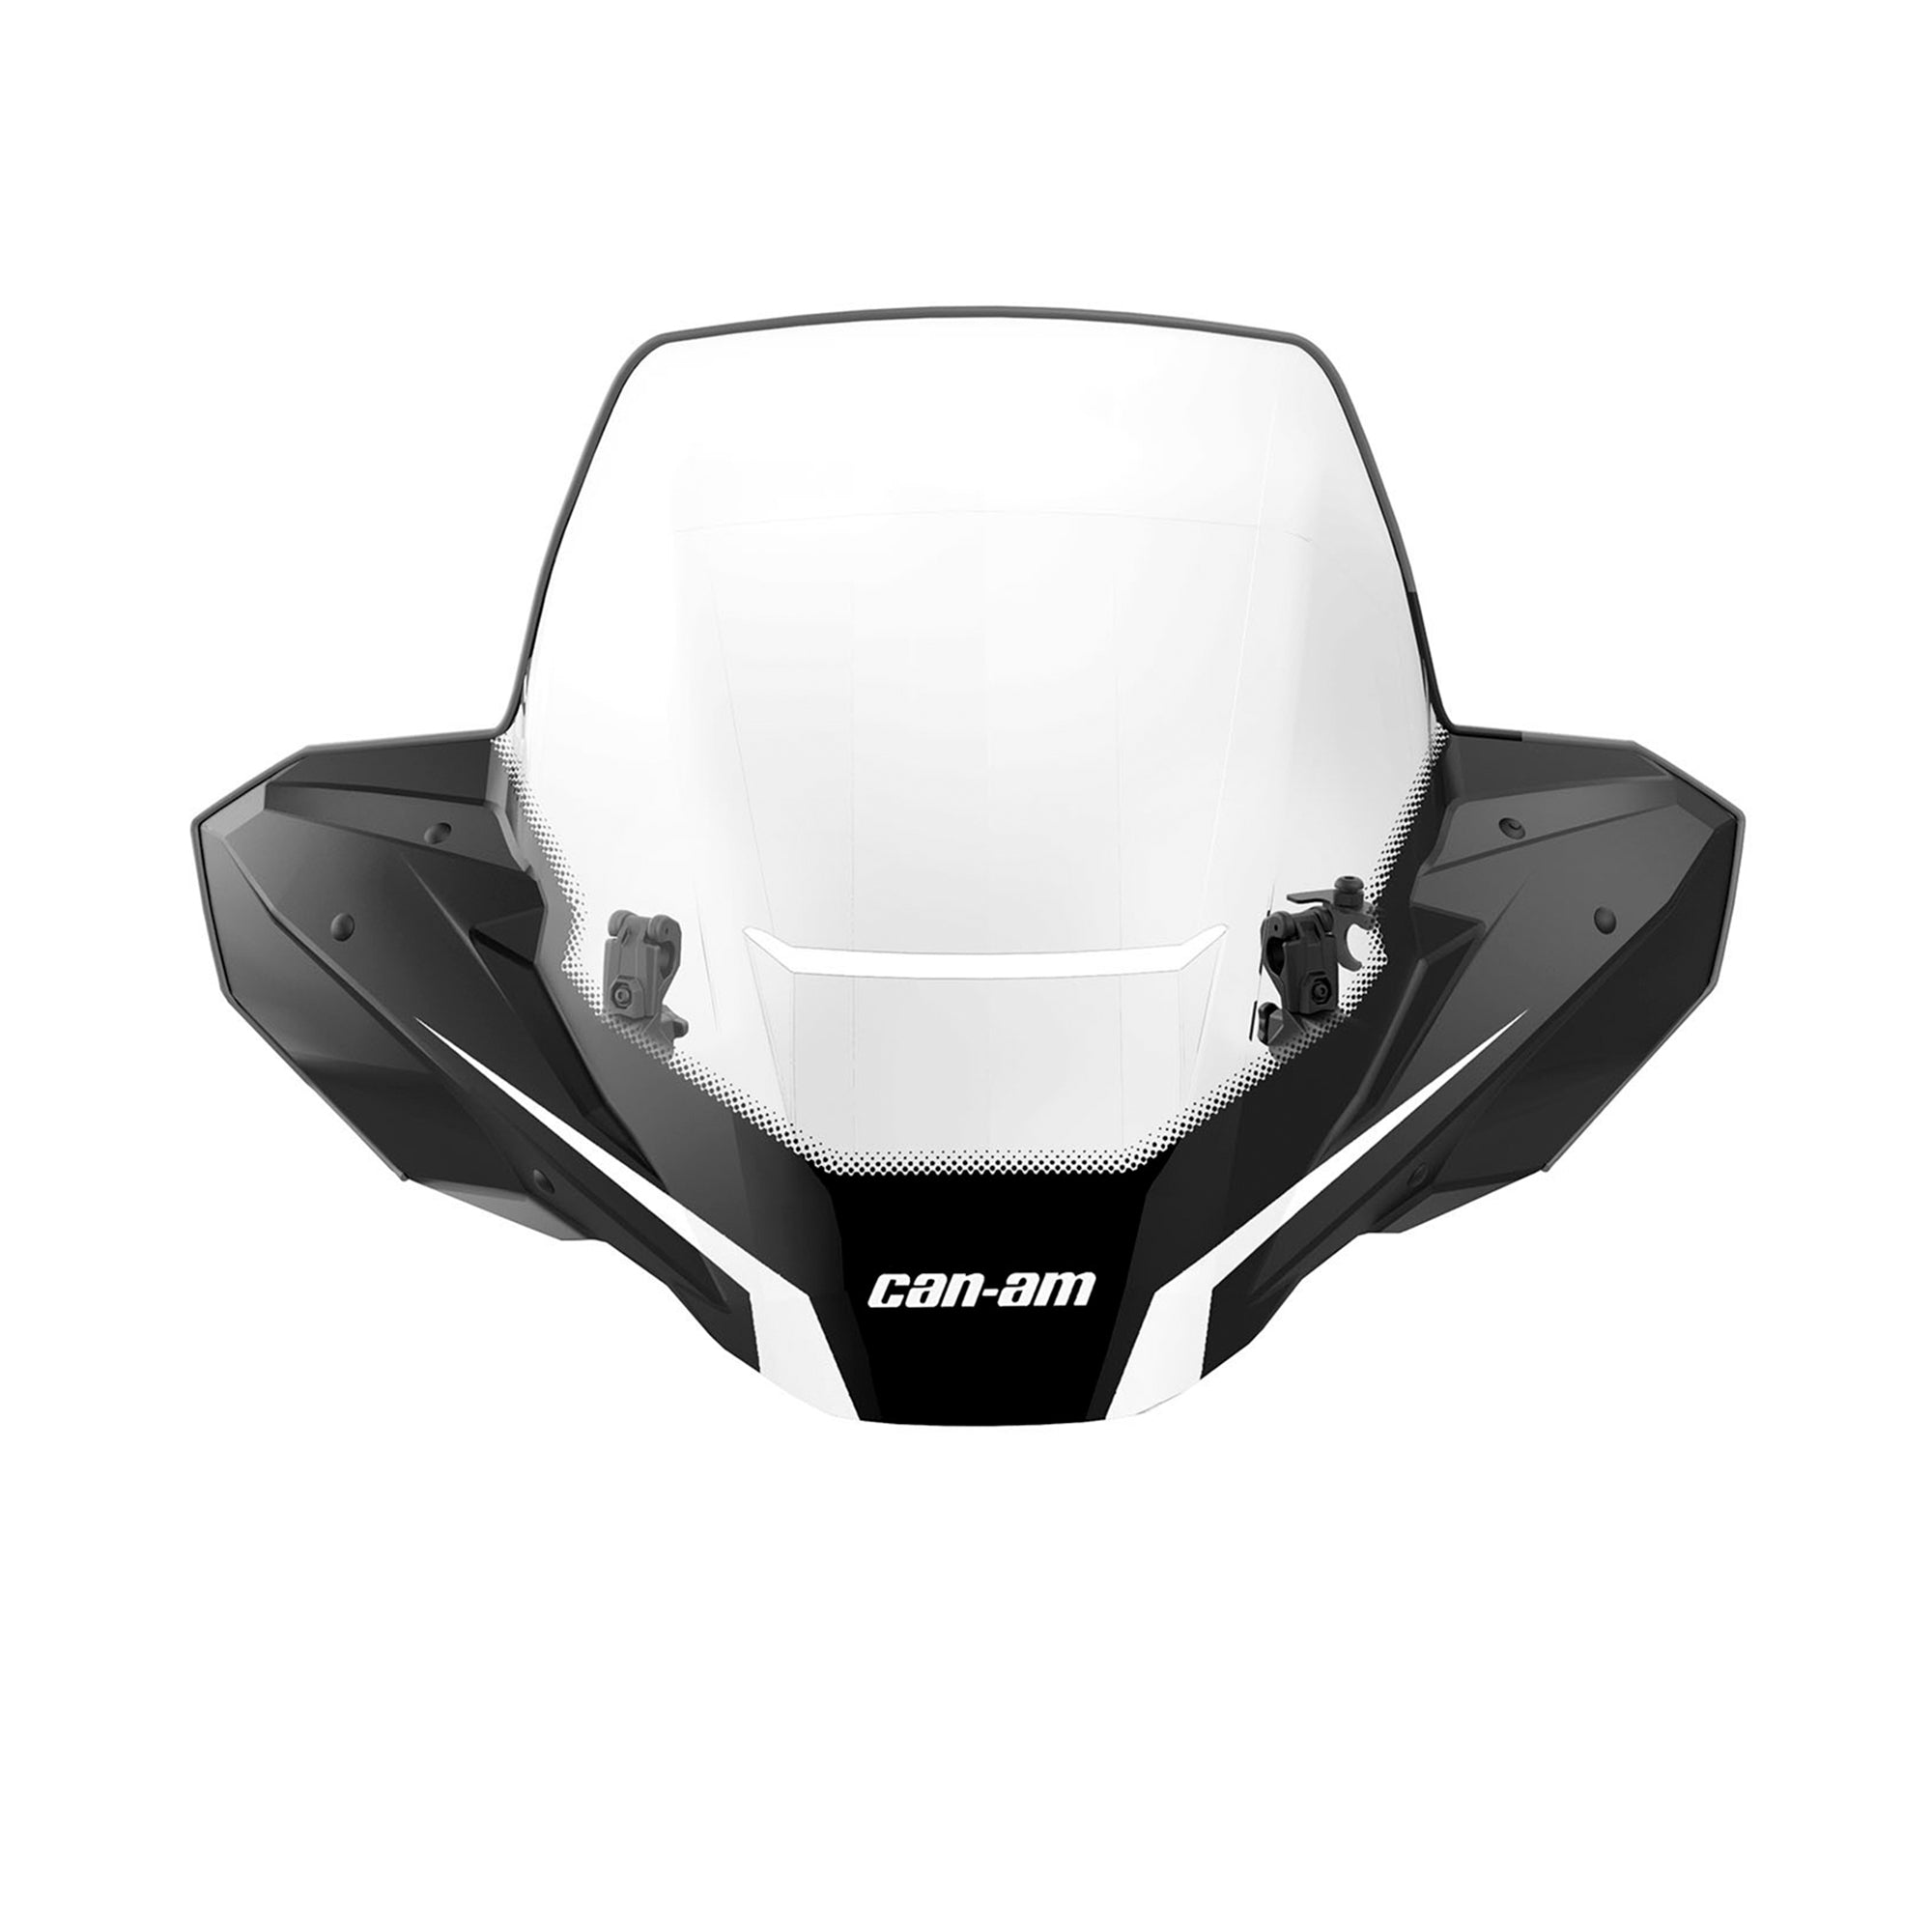 Can-Am 715006382 Windshield Renegade Outlander 1000 1000R 1200 450 500